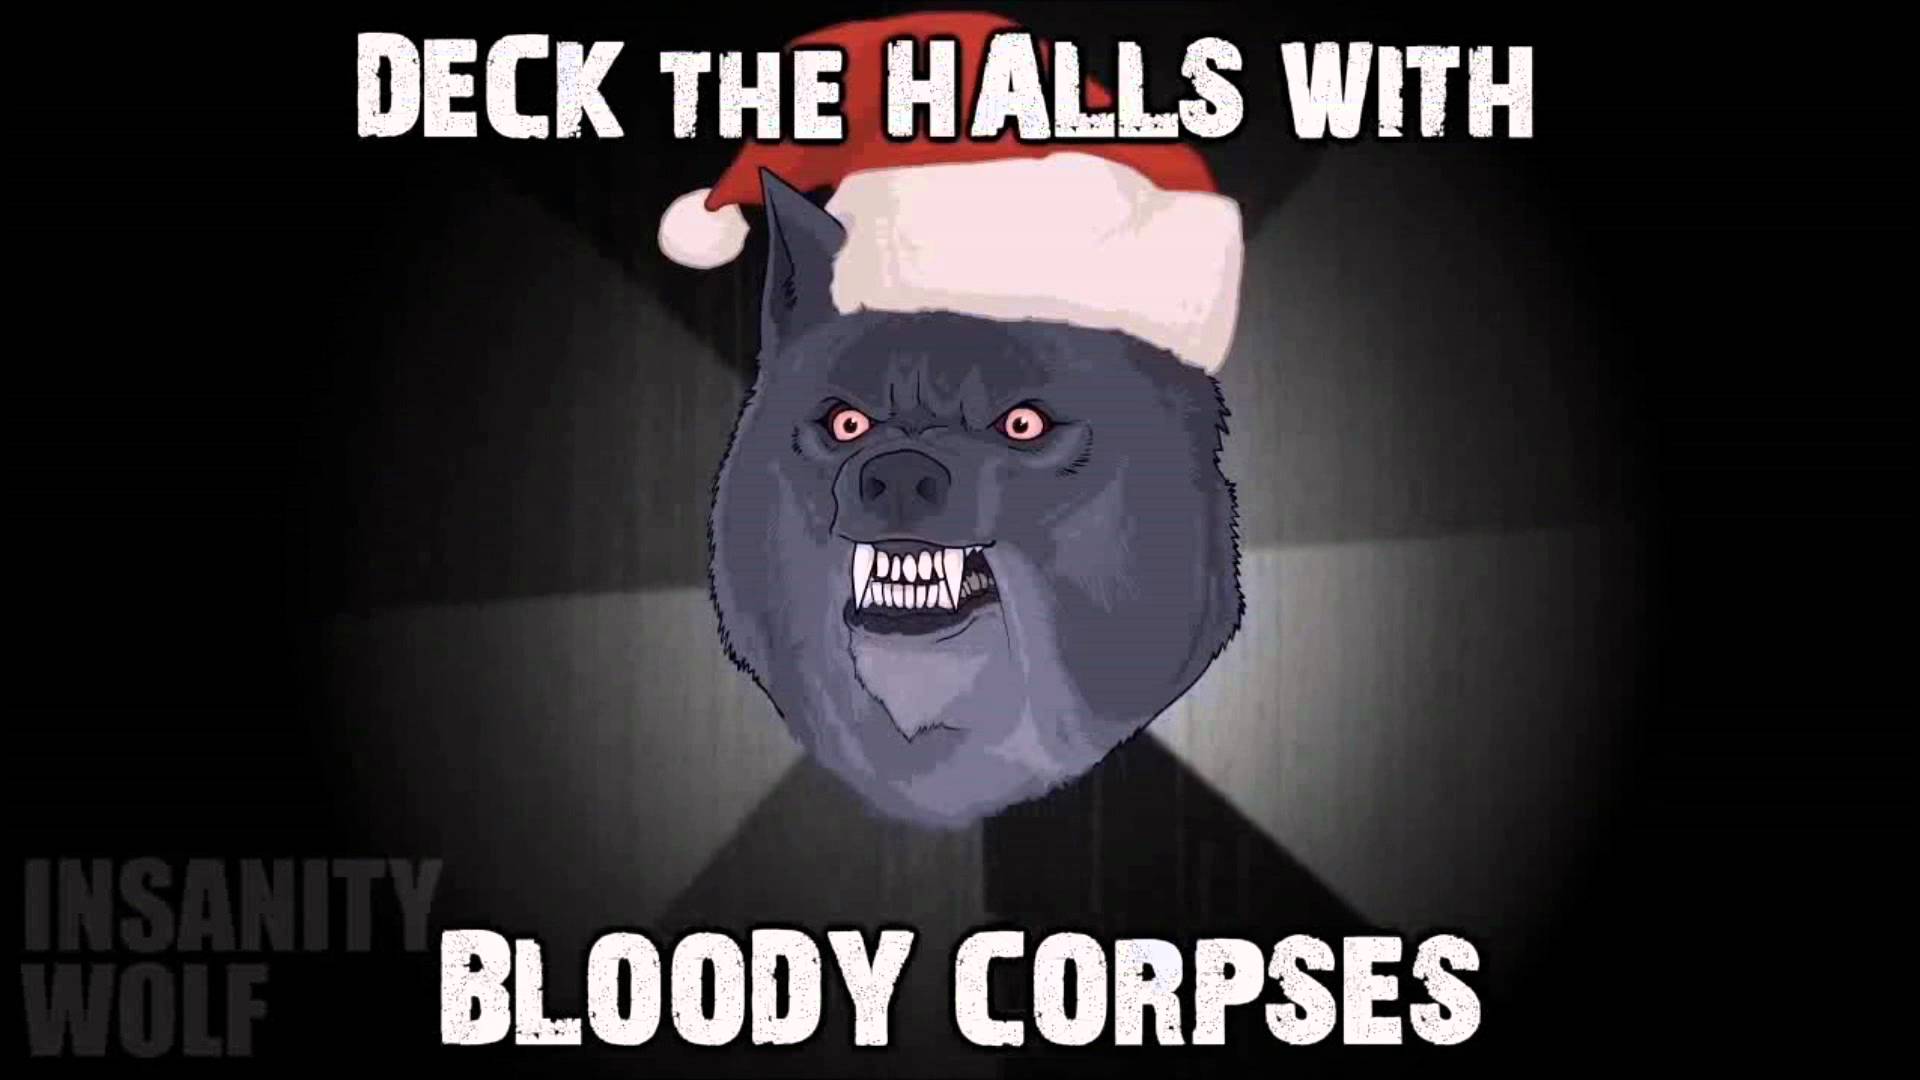 insanity wolf meme - Deck The Halls With Va Wolf Bloody Corpses